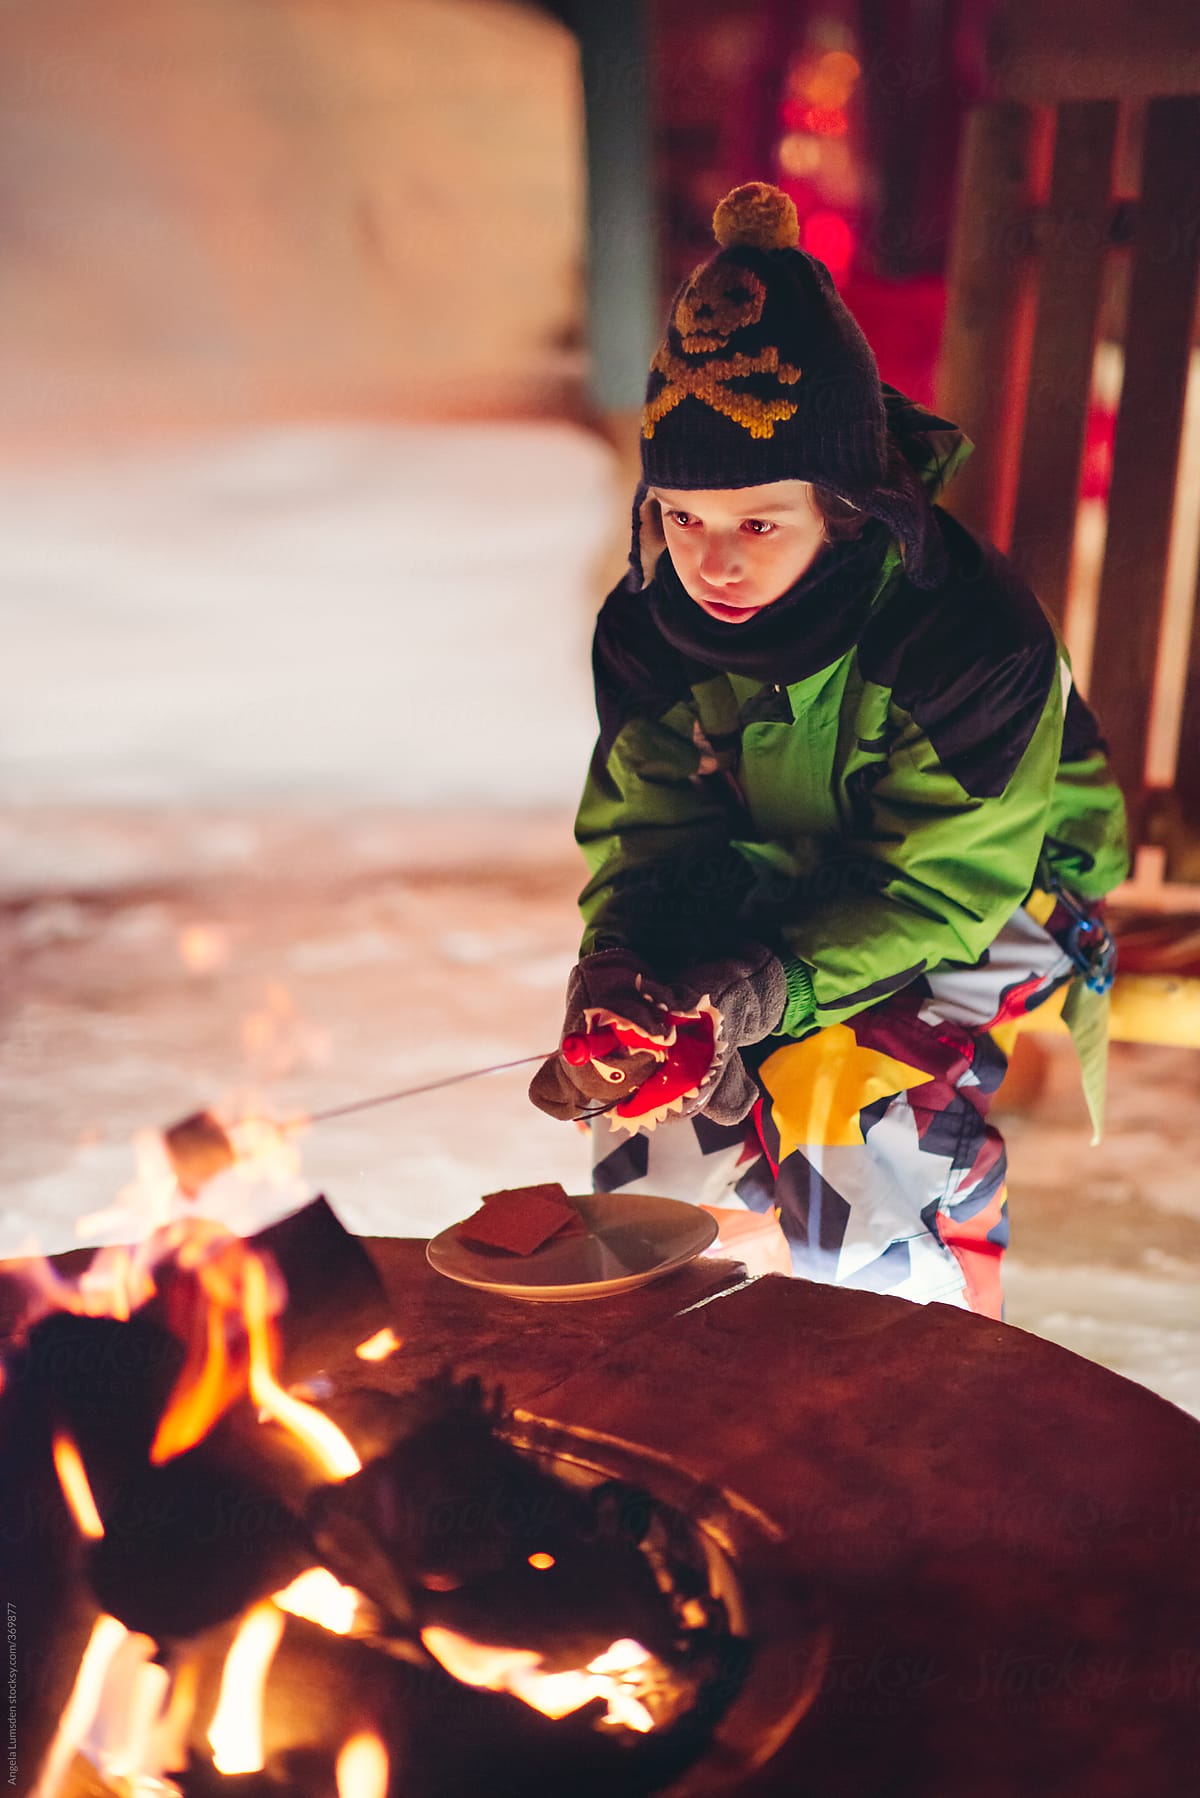 Boy toasting marshmallows over a camp fire at night surrounded by snow in winter